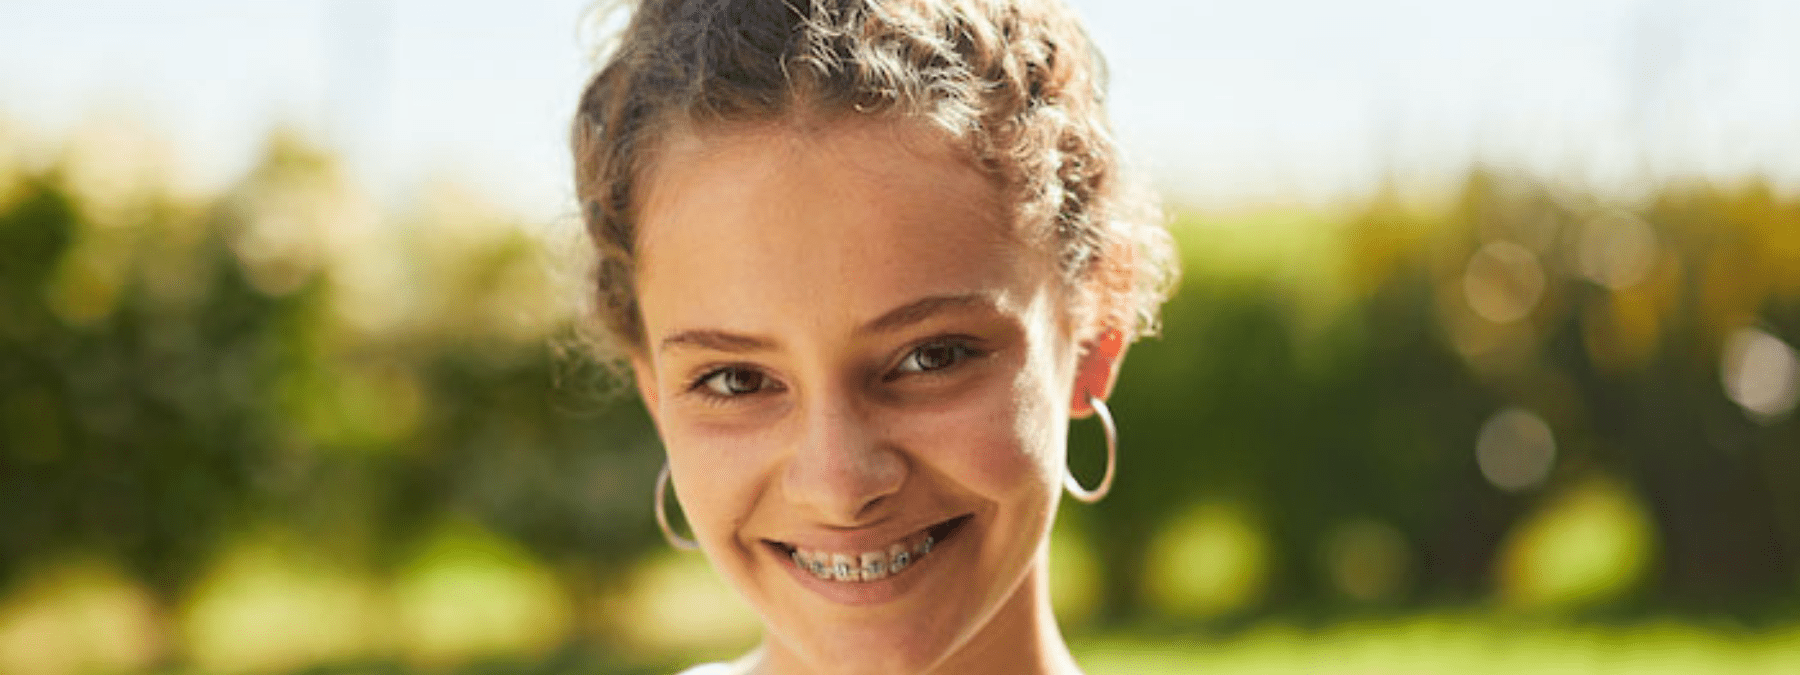 This Summer will be “No Sweat” with these braces tips